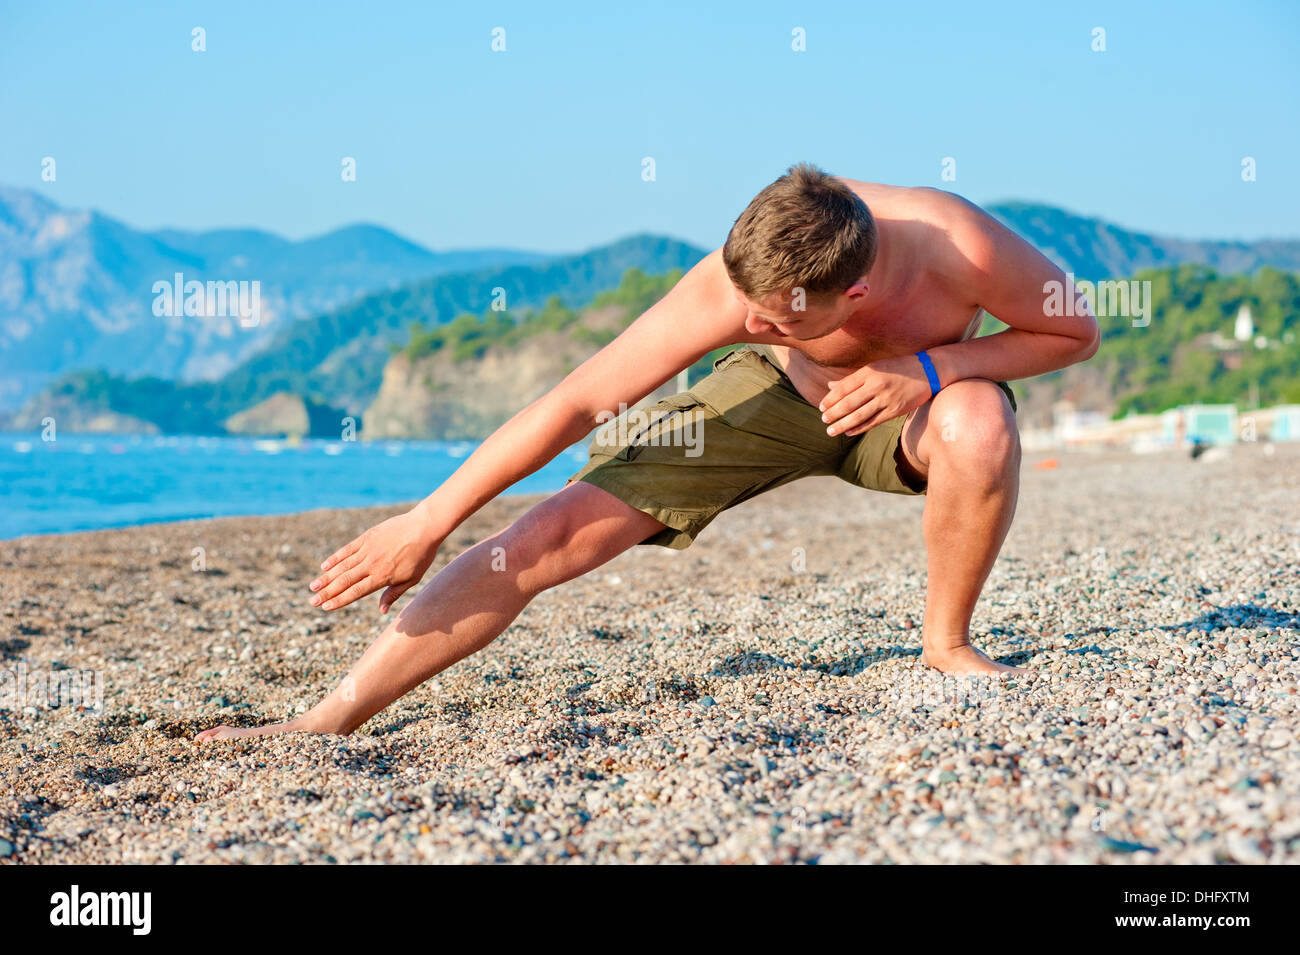 man playing sports on the beach at dawn Stock Photo